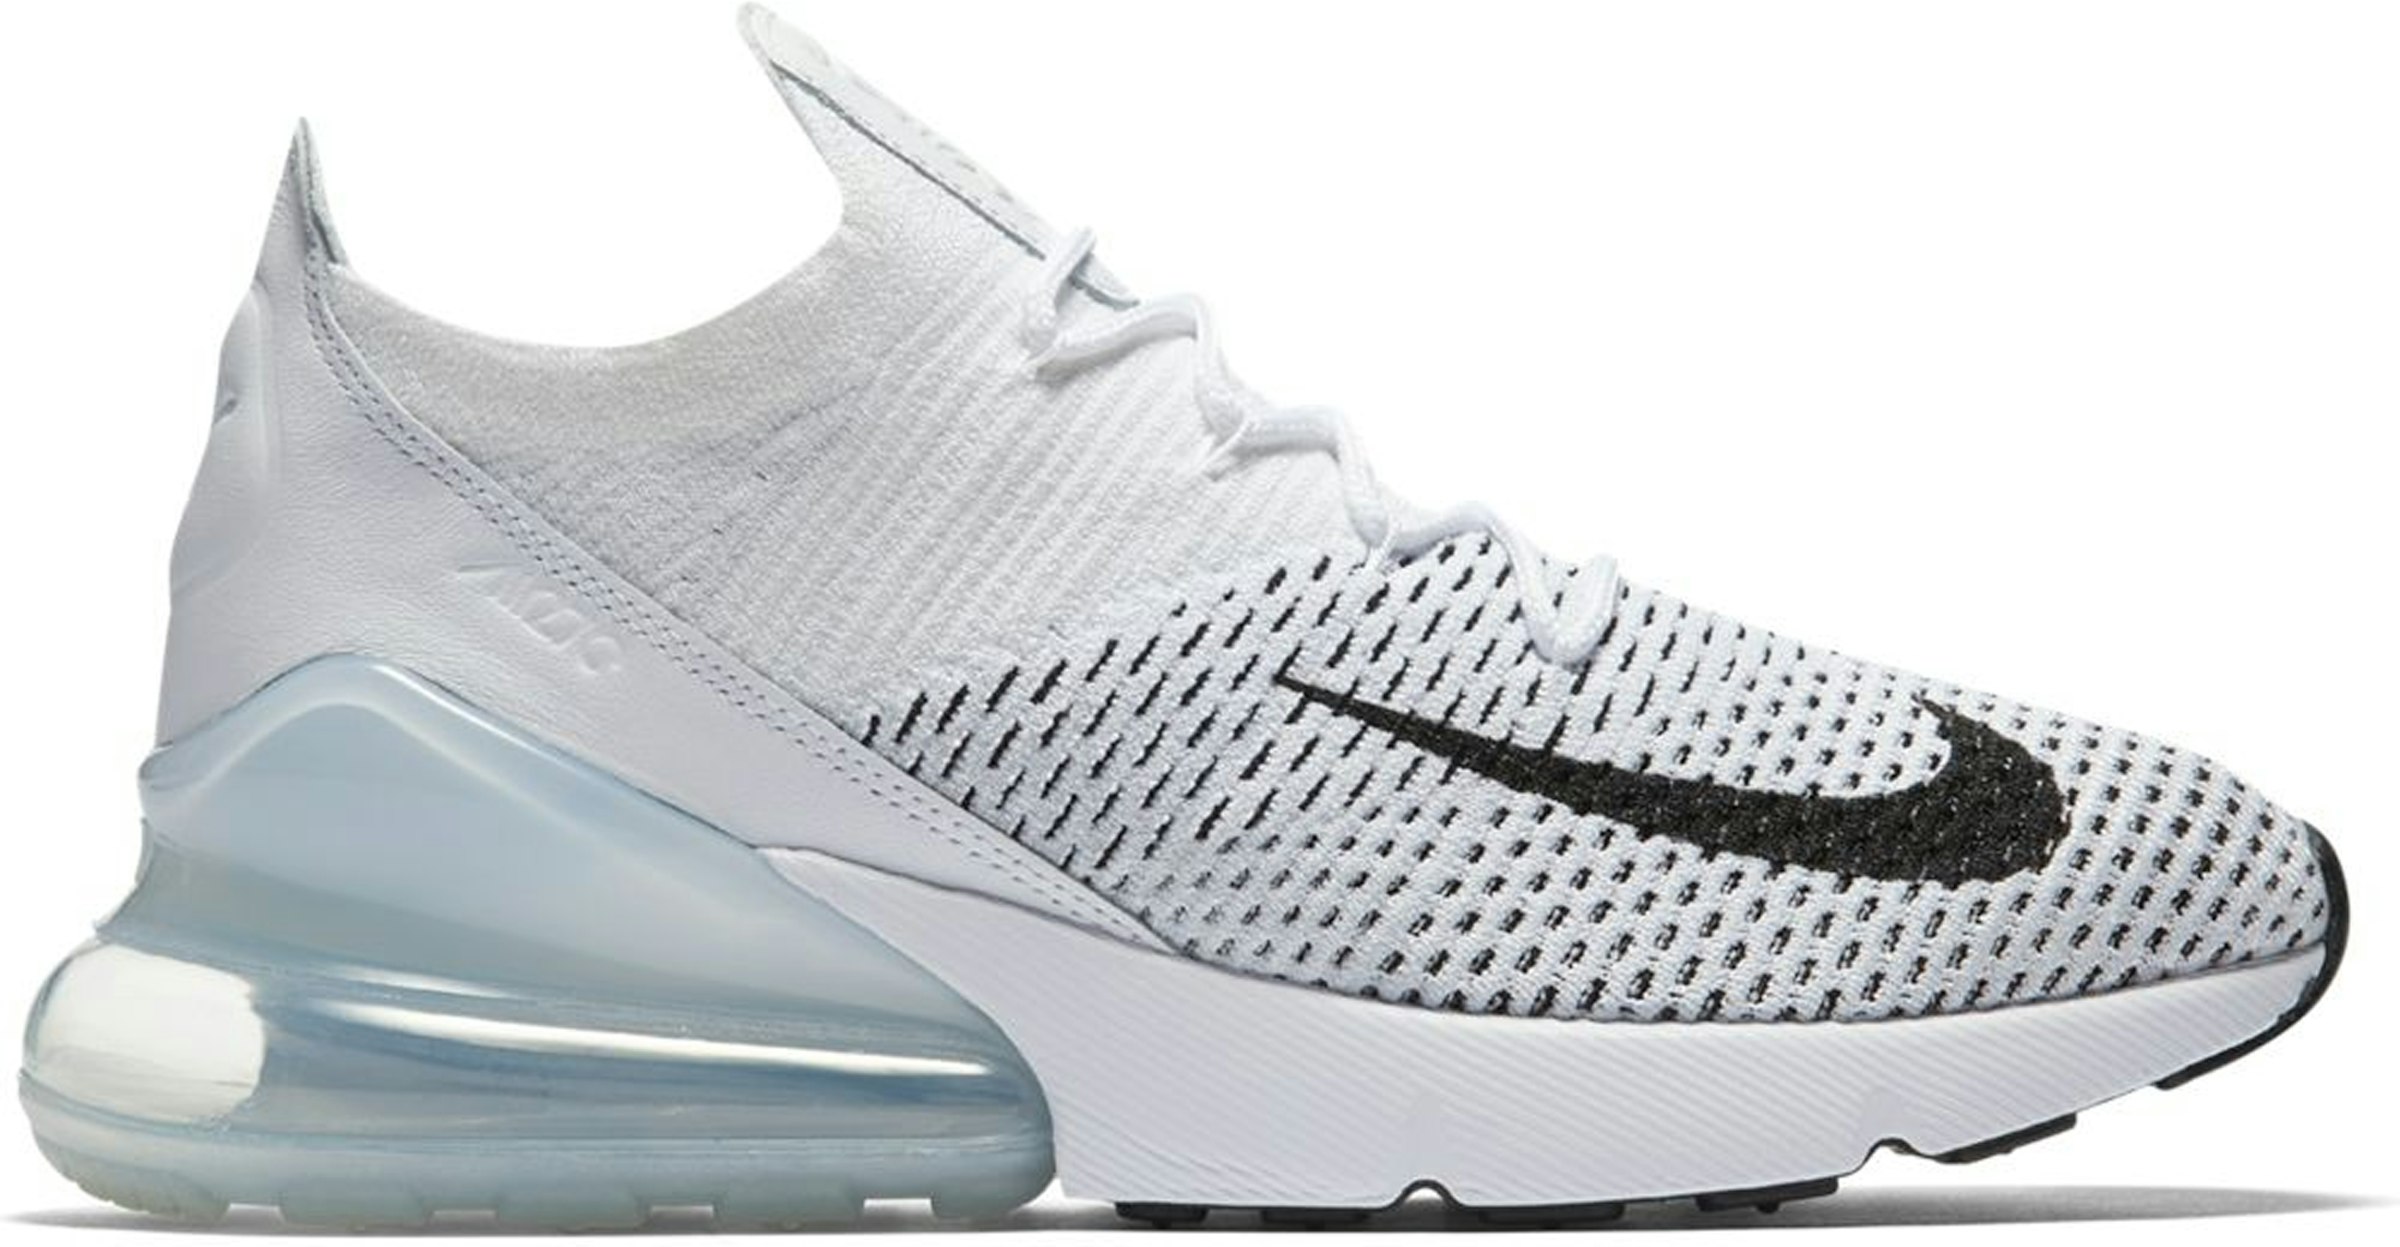 Nageslacht jeans tekort Nike Air Max 270 Flyknit White Black (Women's) - AH6803-100 - US